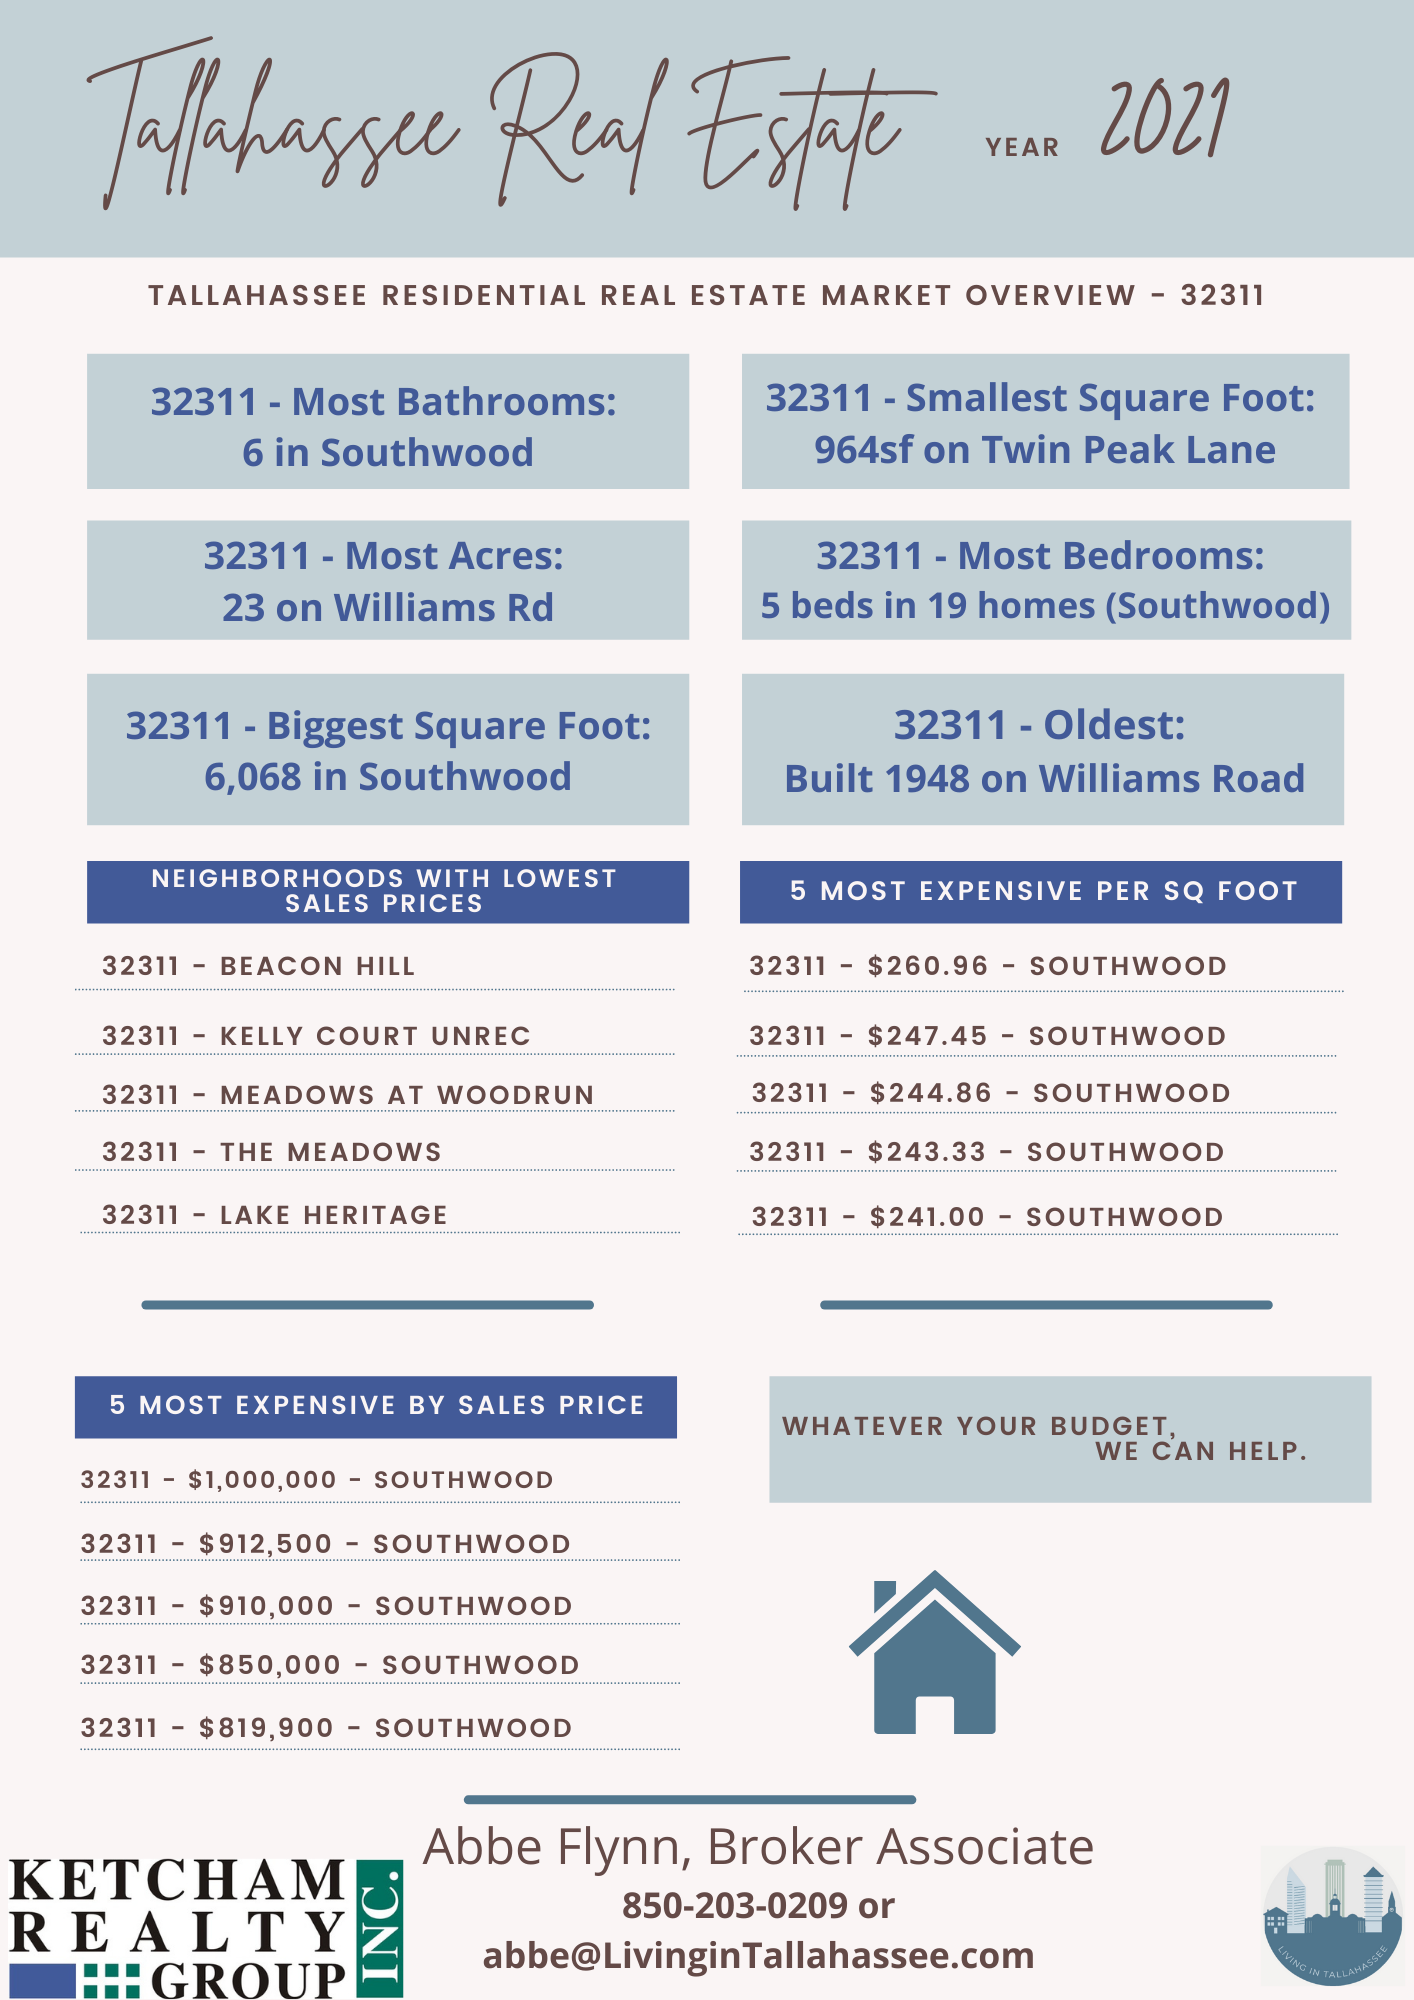 Overview of Tallahassee real estate sold in 2021 in the zip code 32311. Most bathrooms - 6 was sold in Southwood. Smallest square footage was 864sf sold on Twin Peak Lane. Most acres of 23 was sold on Williams Road. Most bedrooms was 5 and there were 19 properties with 5 bedrooms - most in Southwood. Biggest square footage was 6,068 found in Southwood. Oldest was built in 1948 and sold on Williams Road.